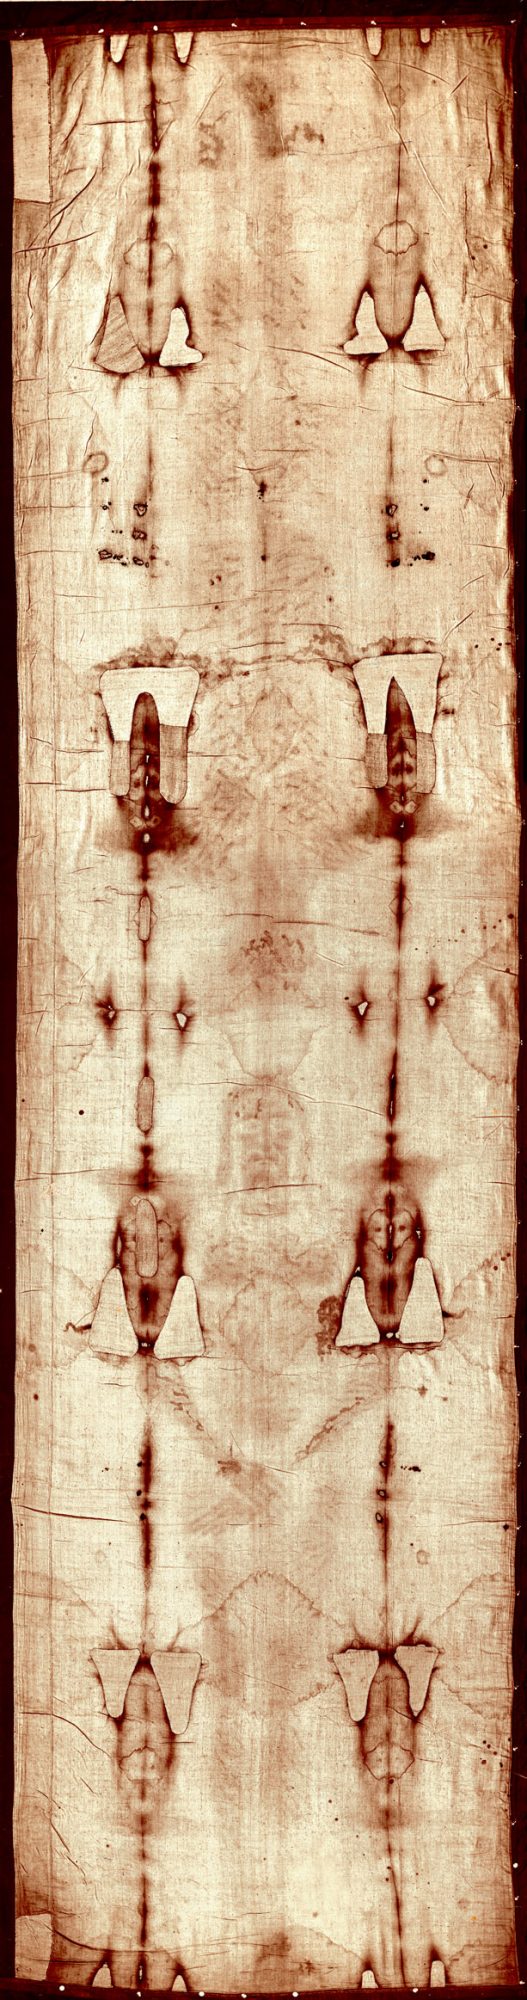 The Shroud of Turin before 2002